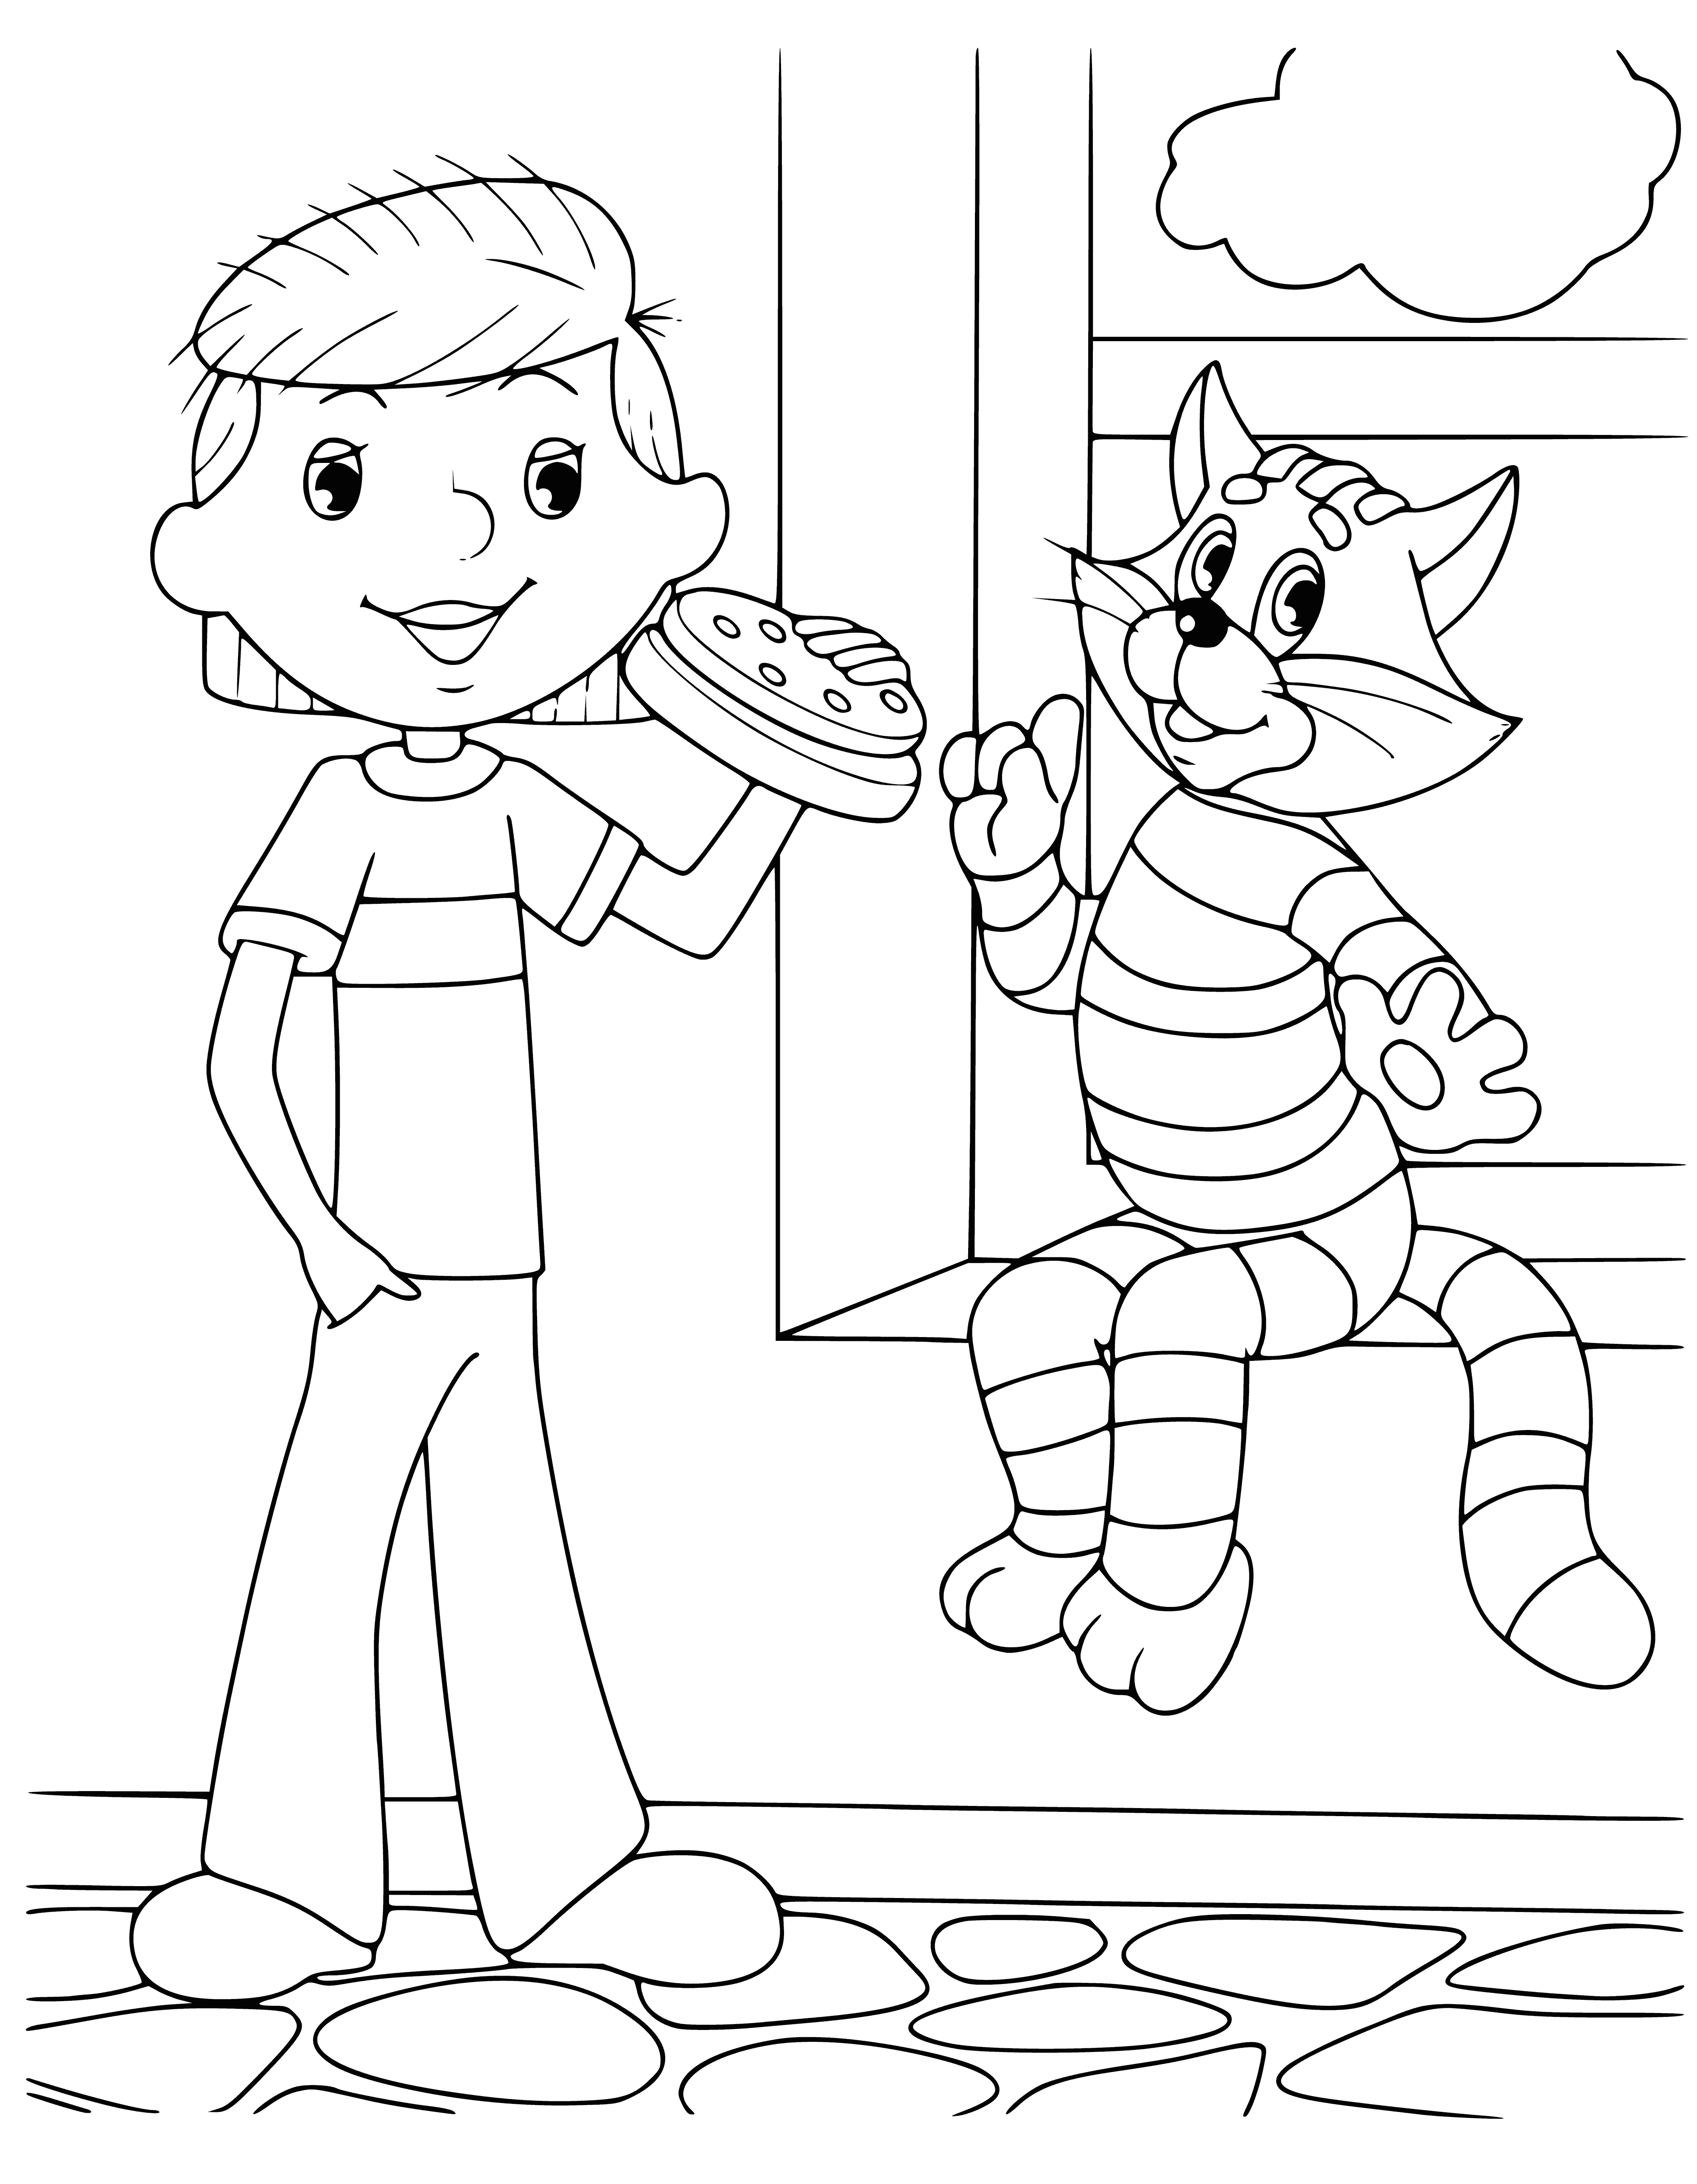 coloring page: Man standing on path leading to house in center of page, bag in hand; cat on edge of roof looking at him.